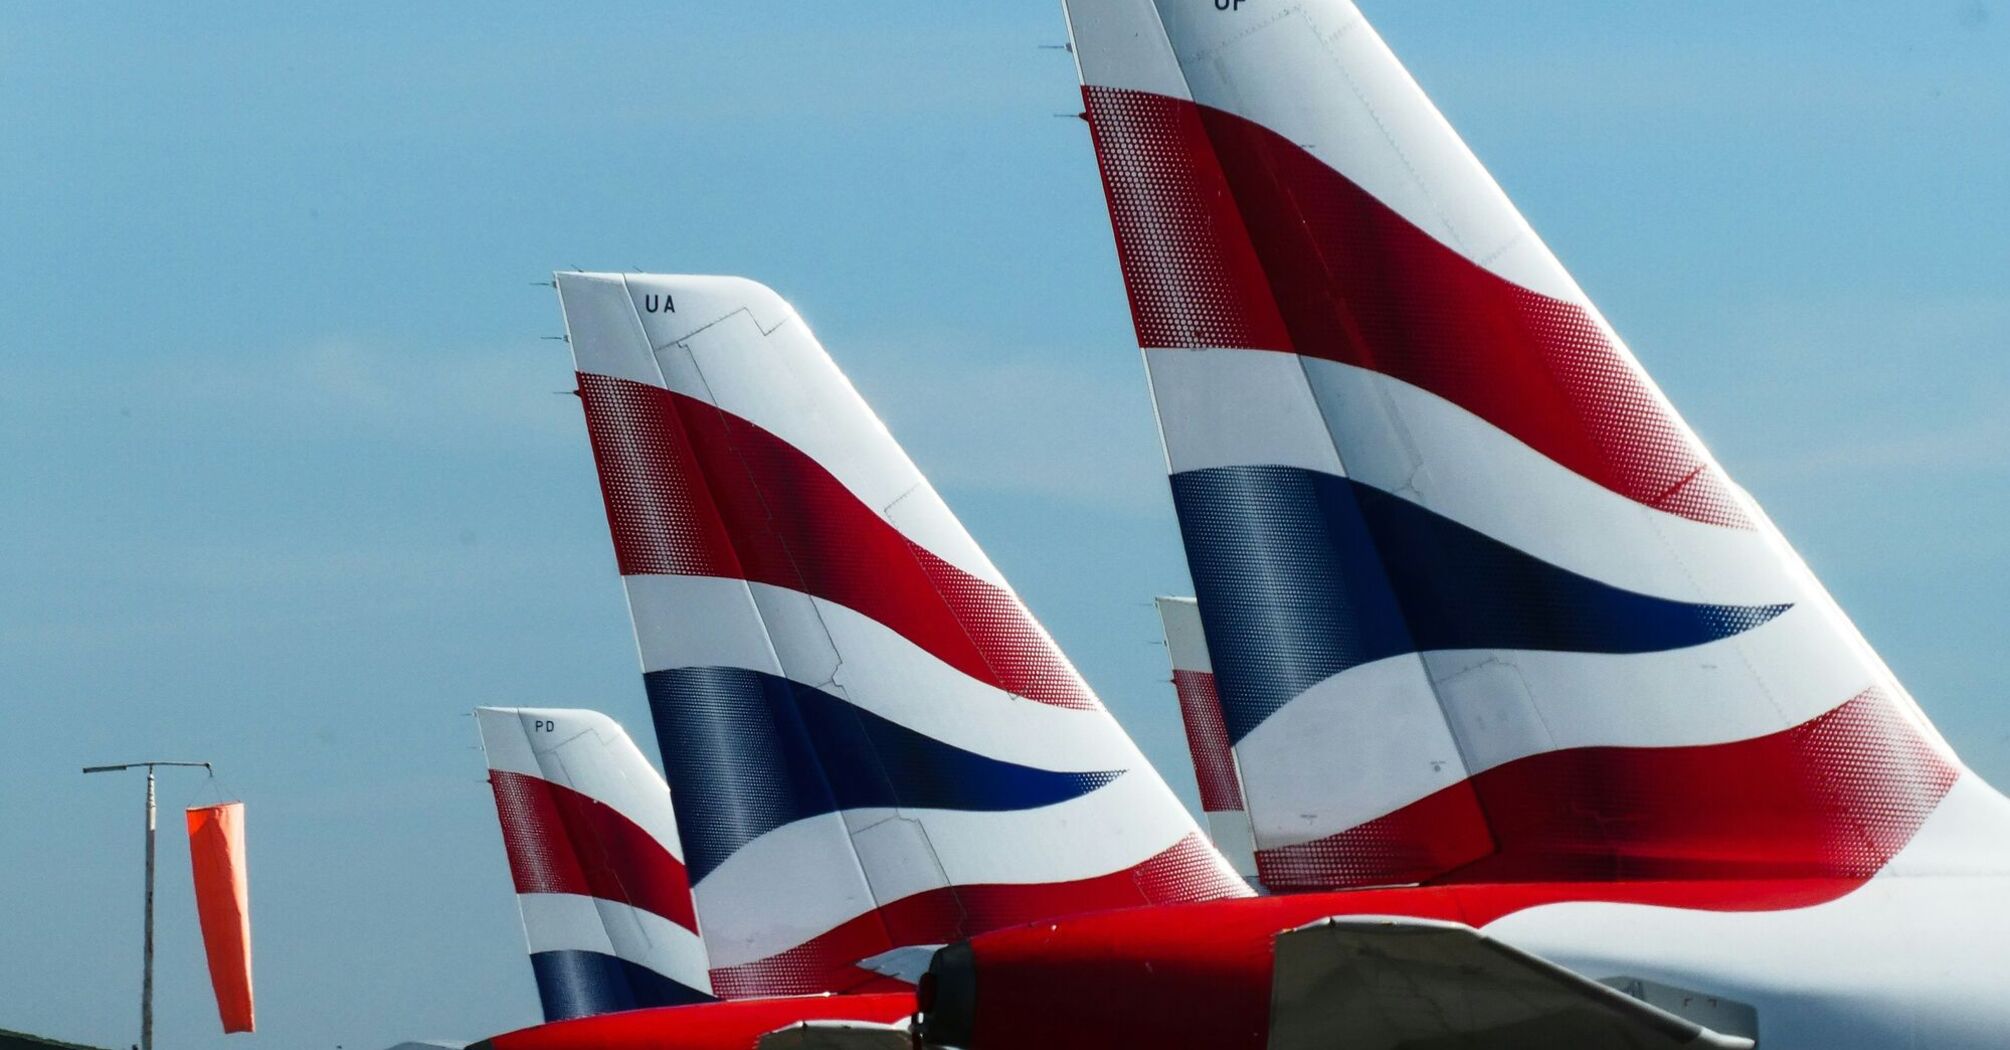 Red, blue and white plane tails